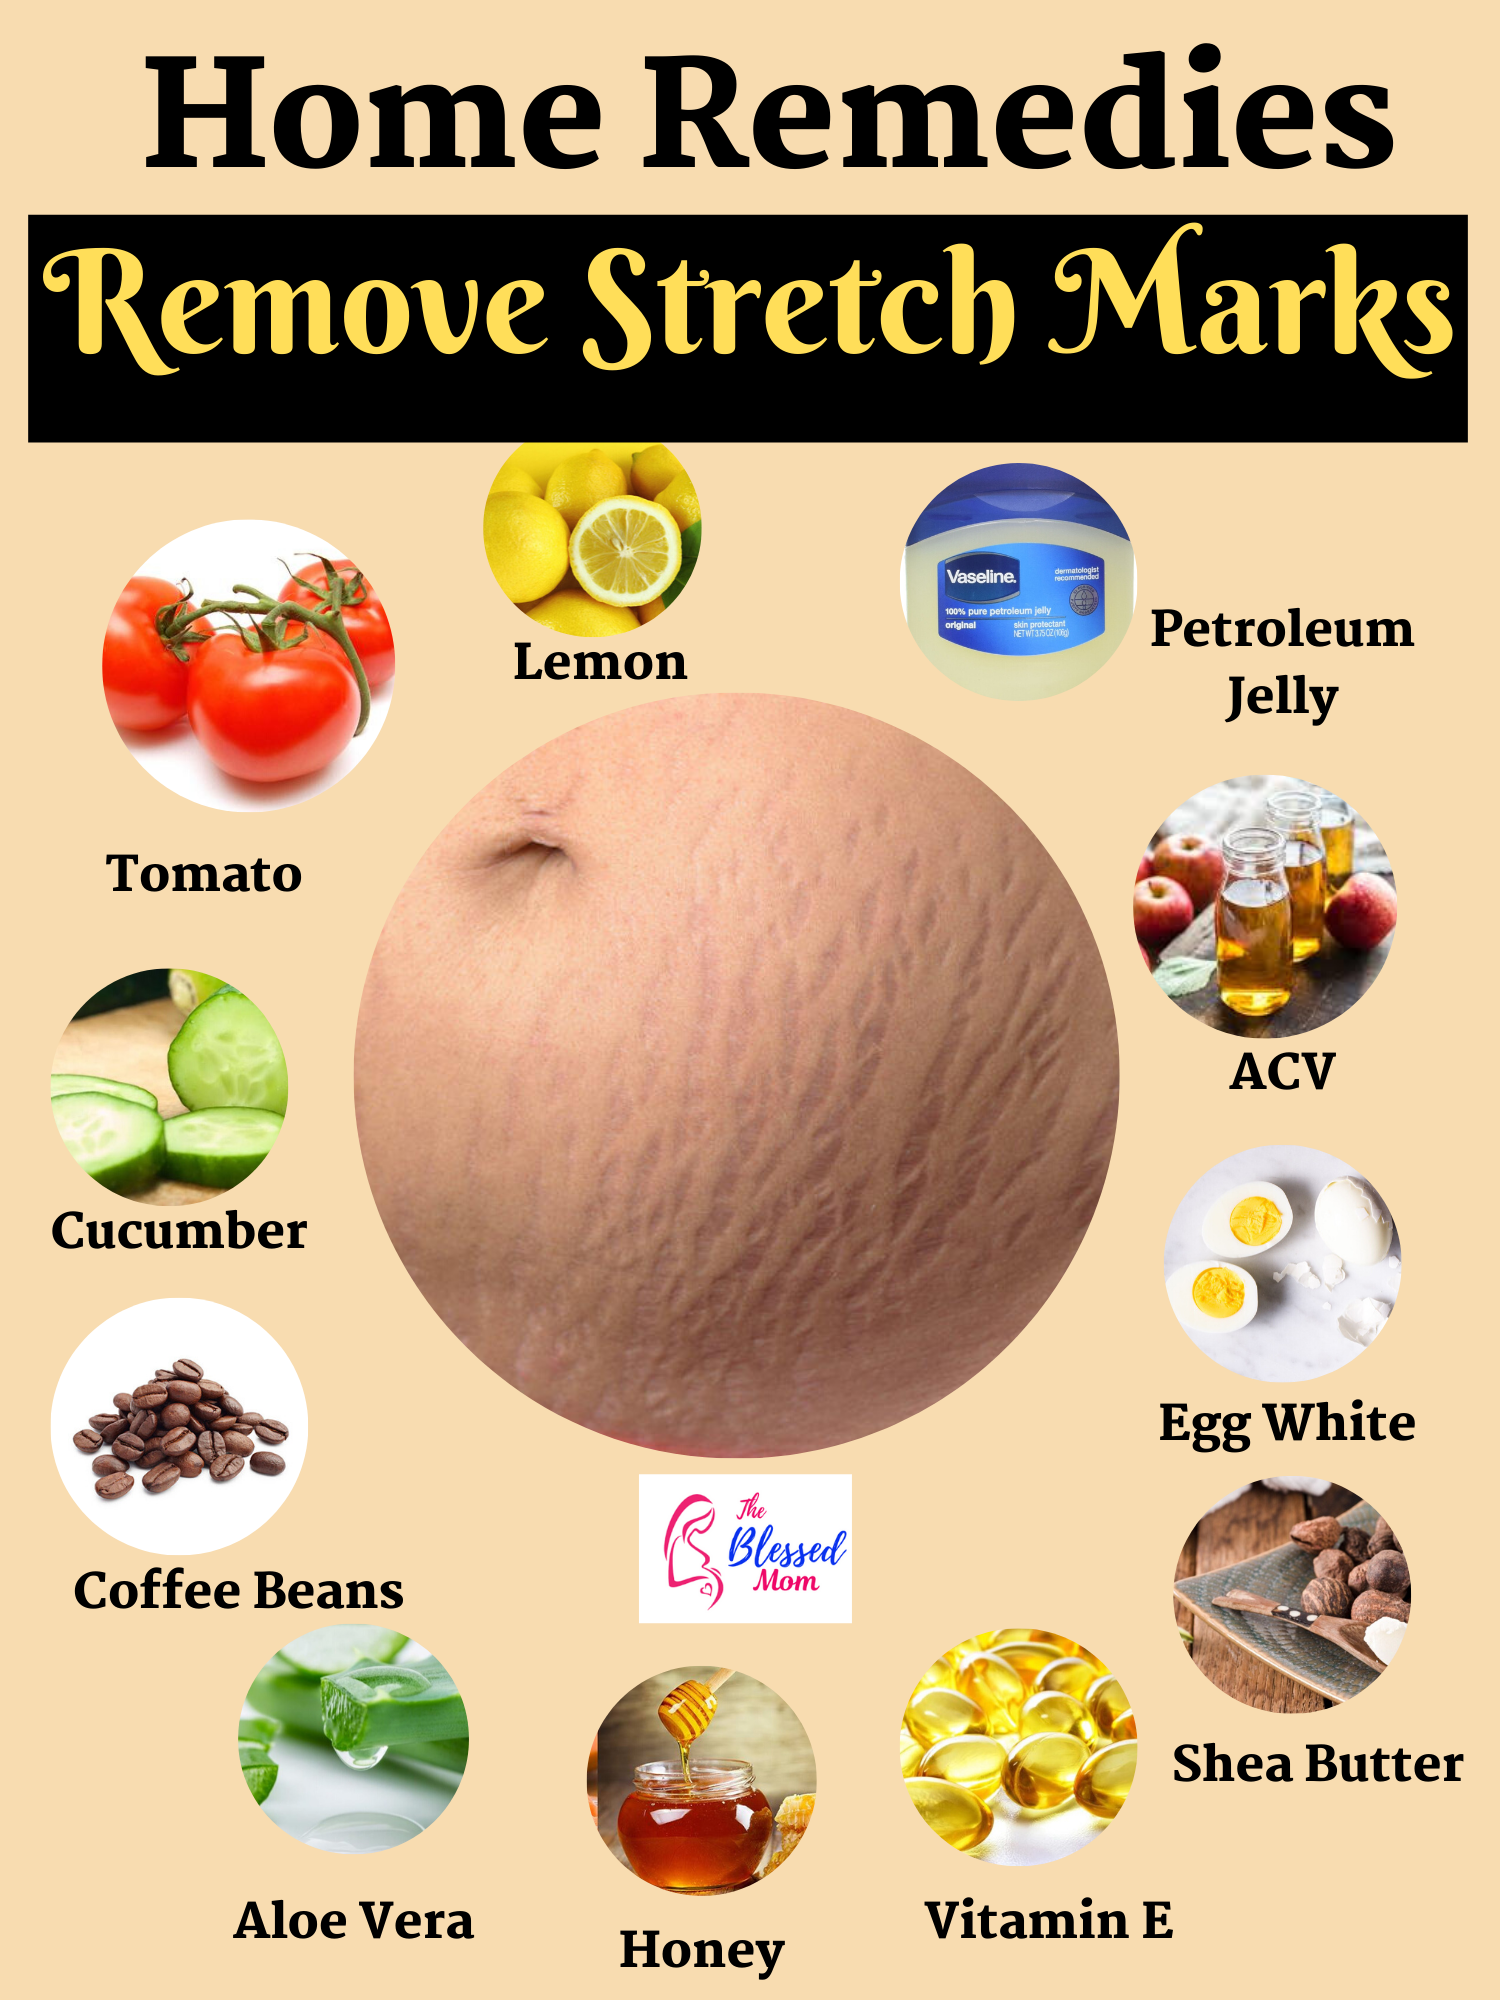 How To Get Rid Of Stretch Marks Naturally ( Causes+ Home Remedies) -   17 how to get rid of stretch marks ideas